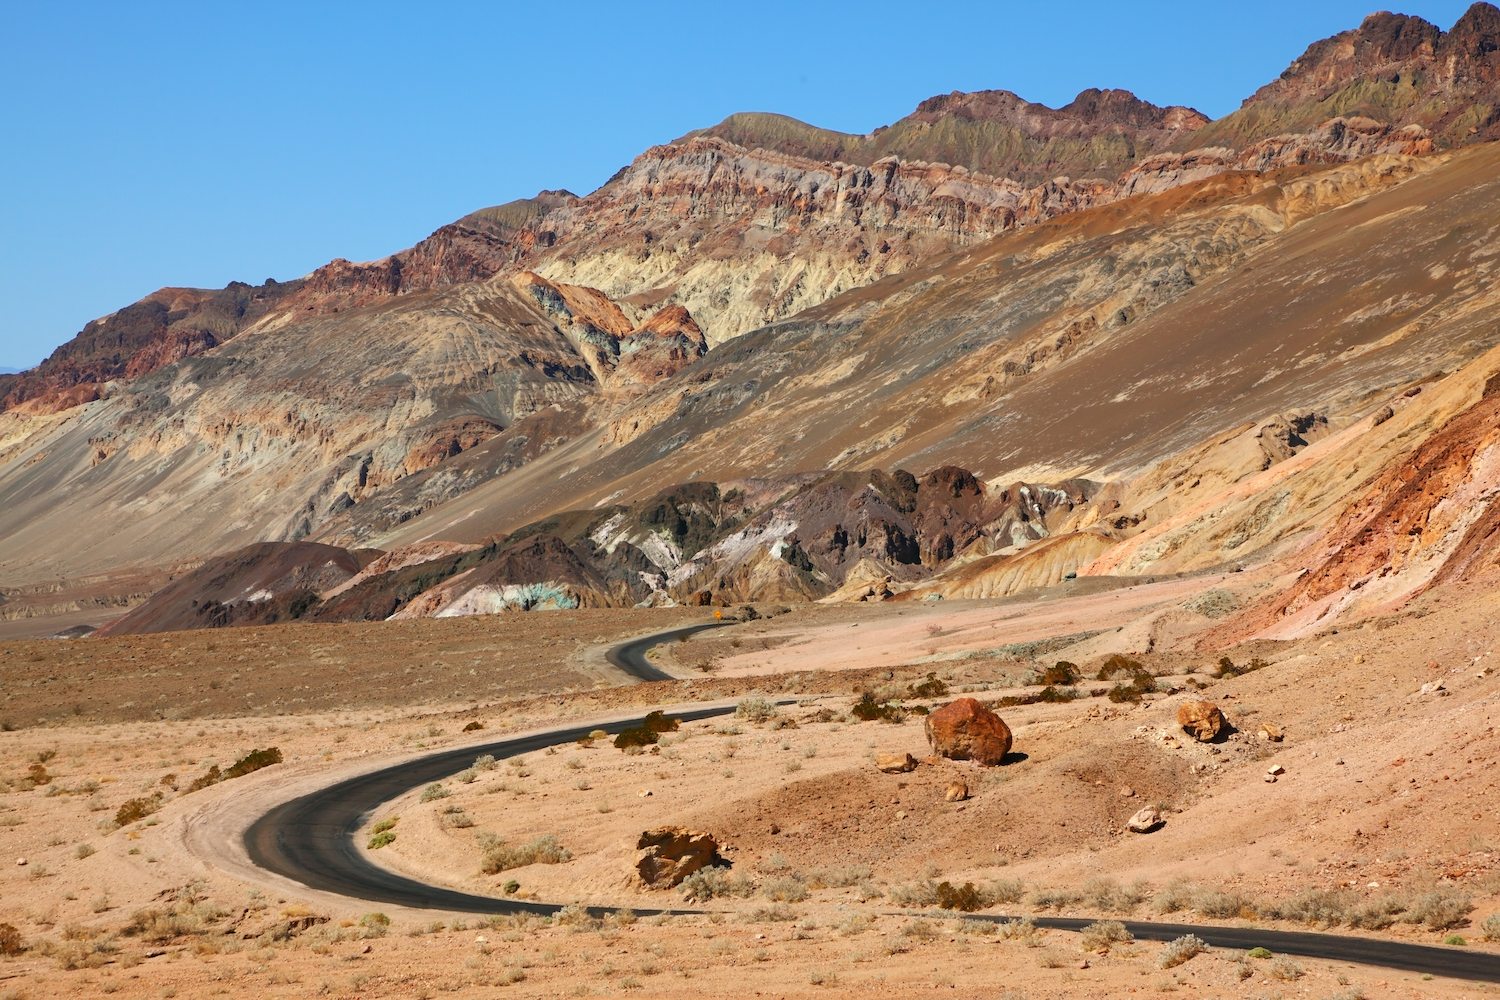 http://drivethenation.com/wp-content/uploads/2015/01/Death-Valley-Scenic-Byway.jpg